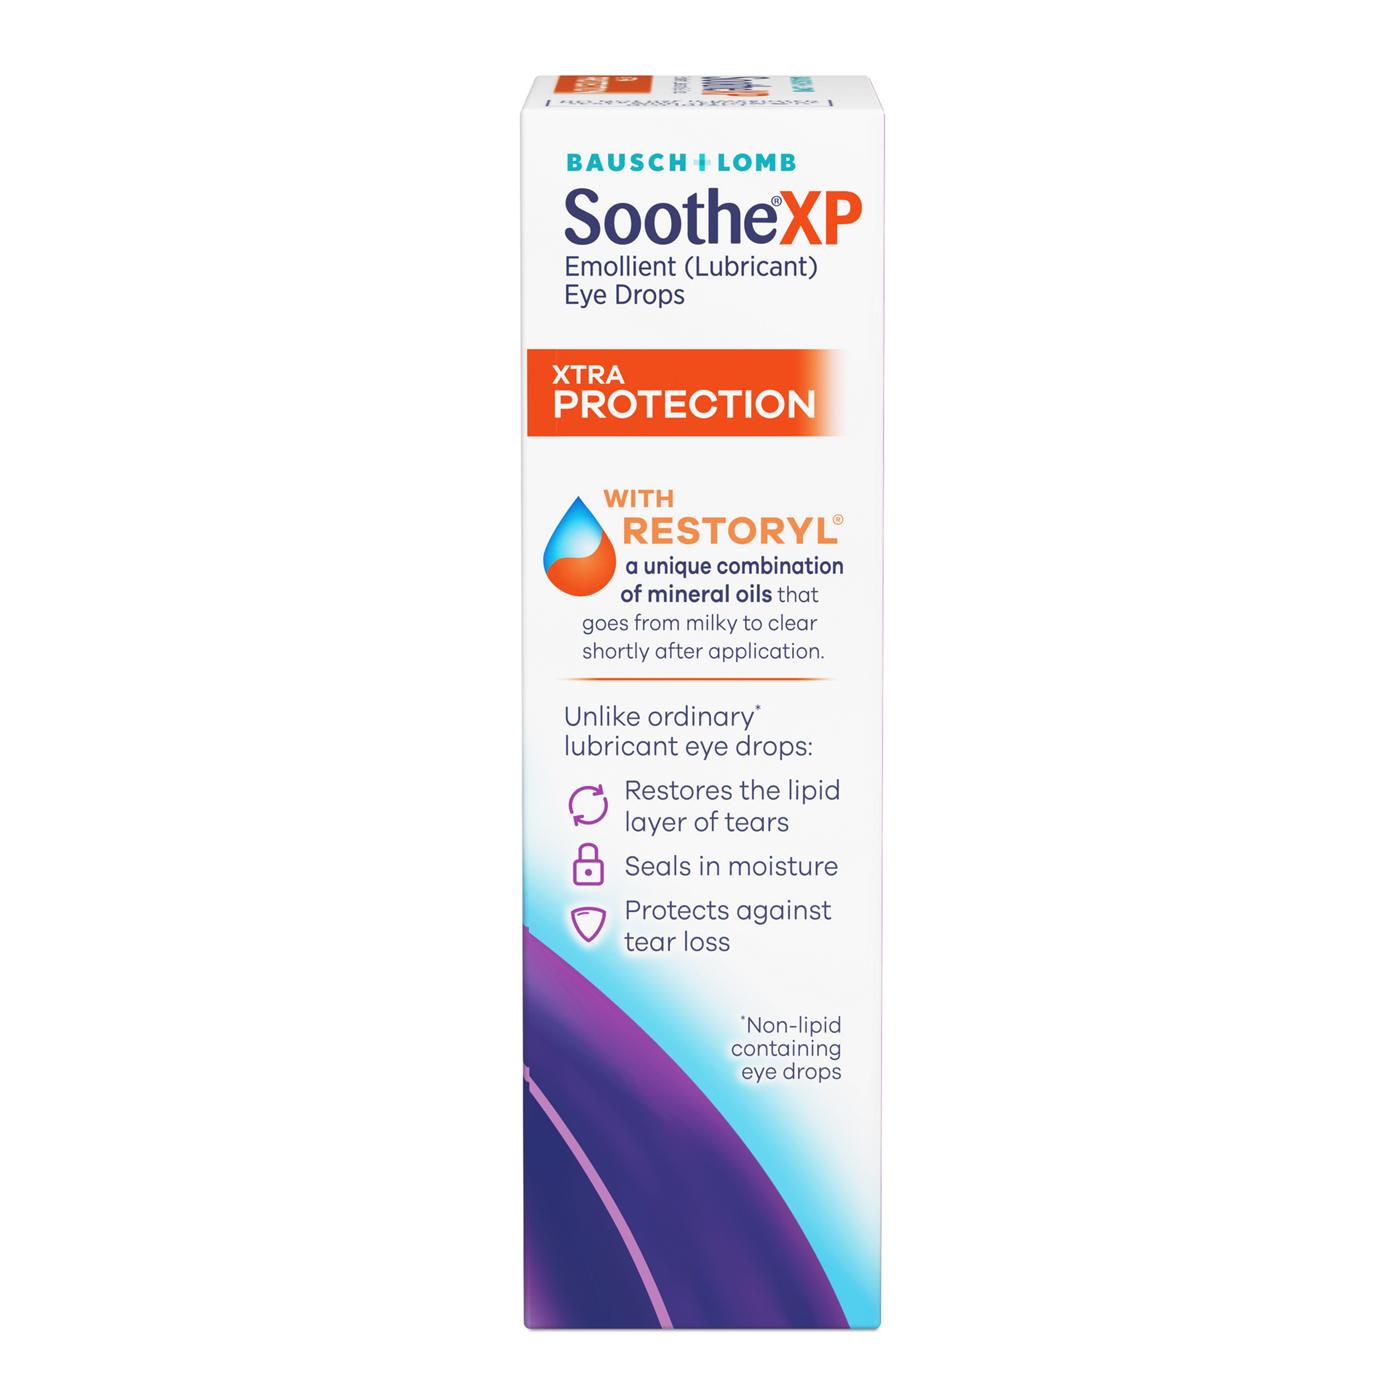 Bausch & Lomb Soothe XP Emollient Lubricant Eye Drops; image 4 of 4